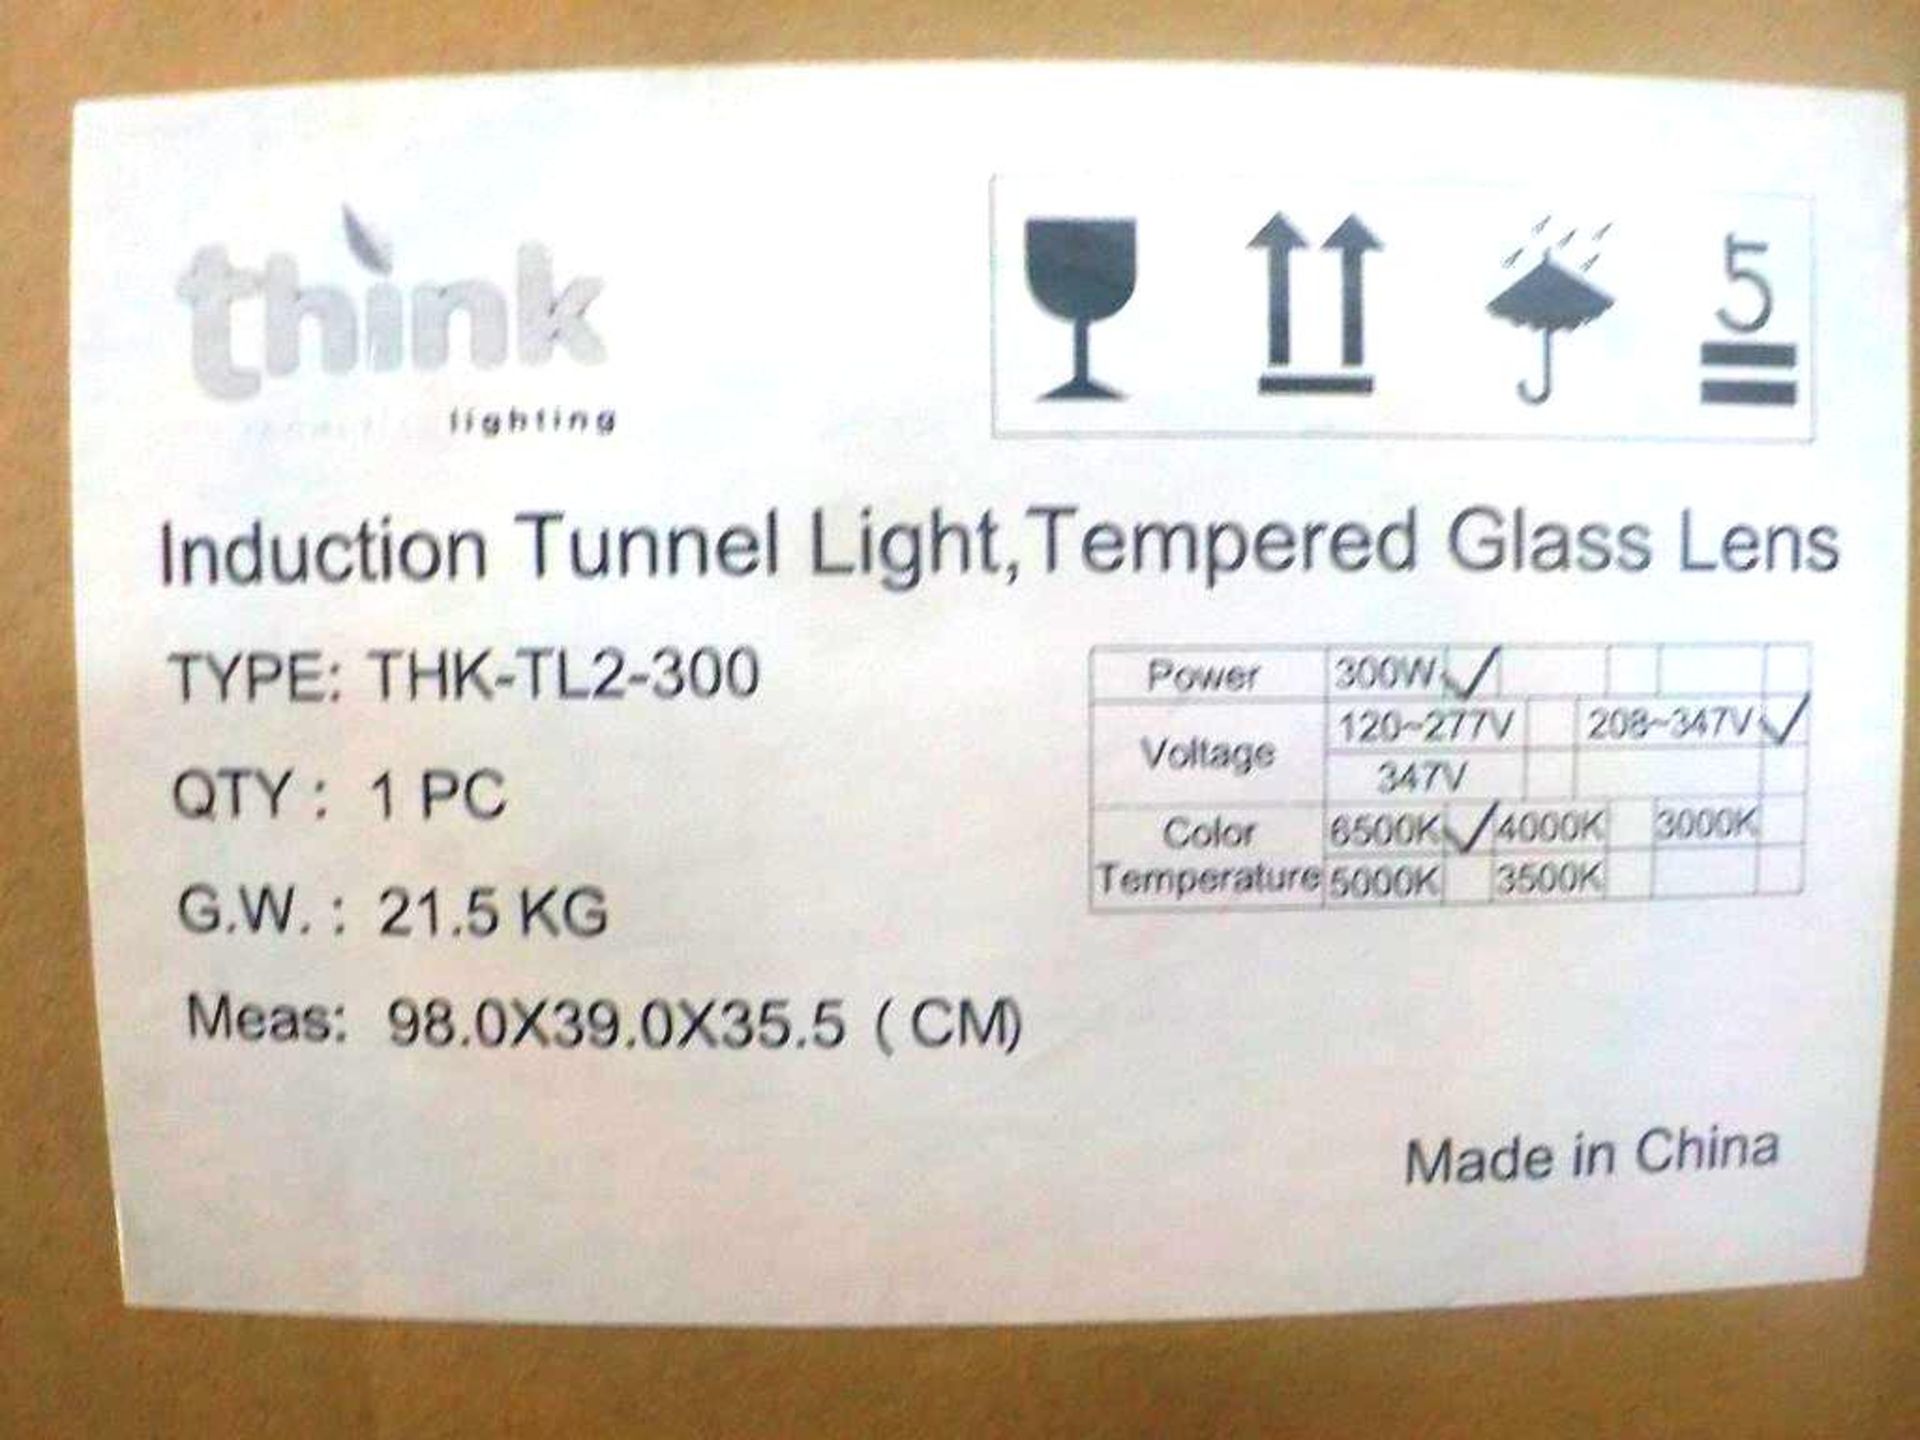 lumière-tunnel induction THINK, #TL2-300 / lnduction tunnel light - Image 4 of 5